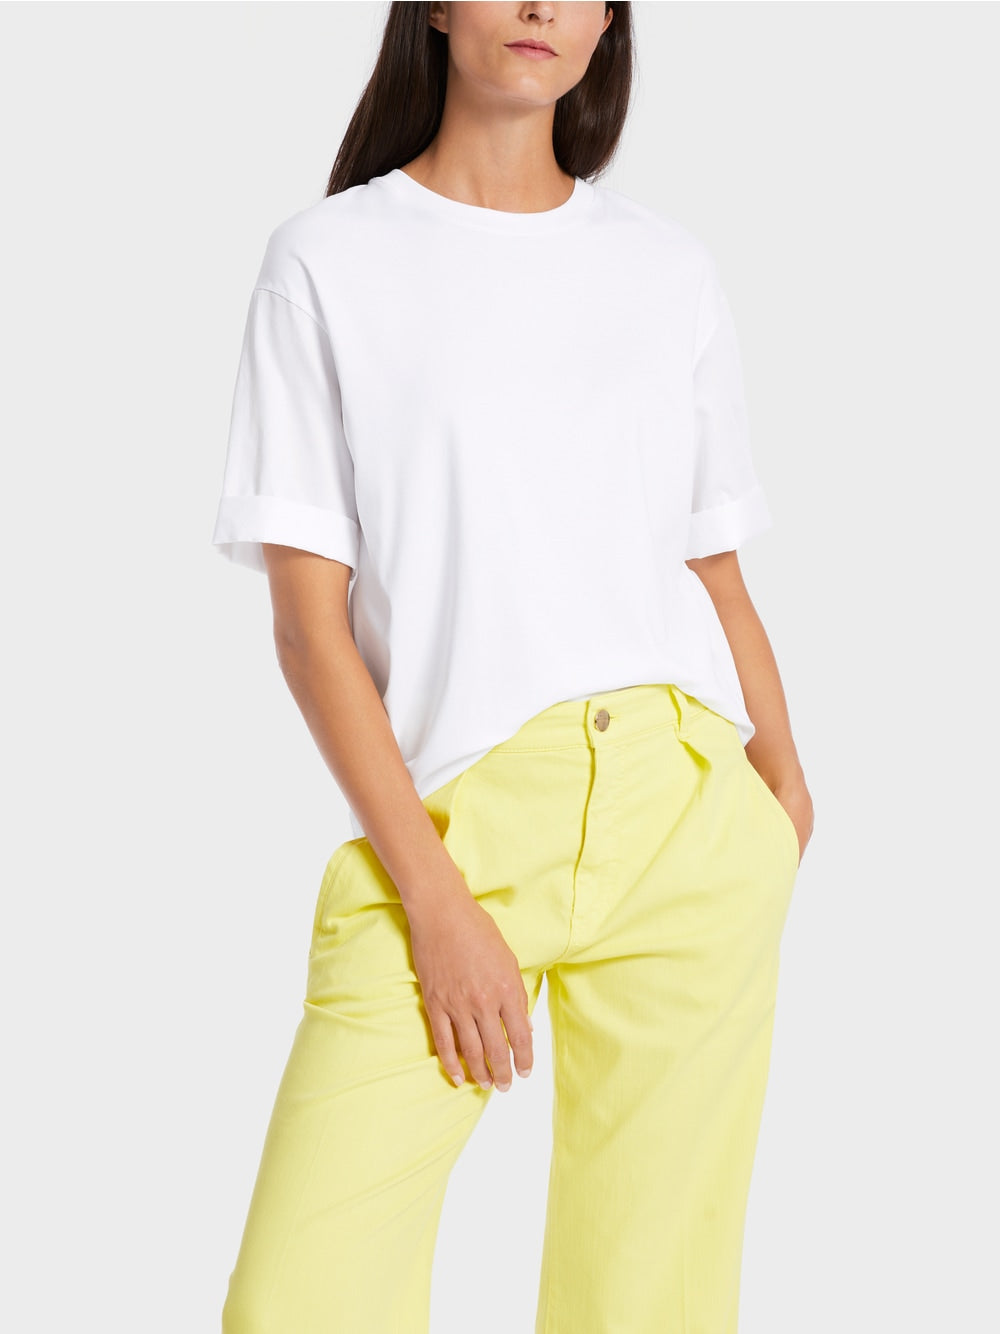 Marc Cain White T-shirt in a mix of materials